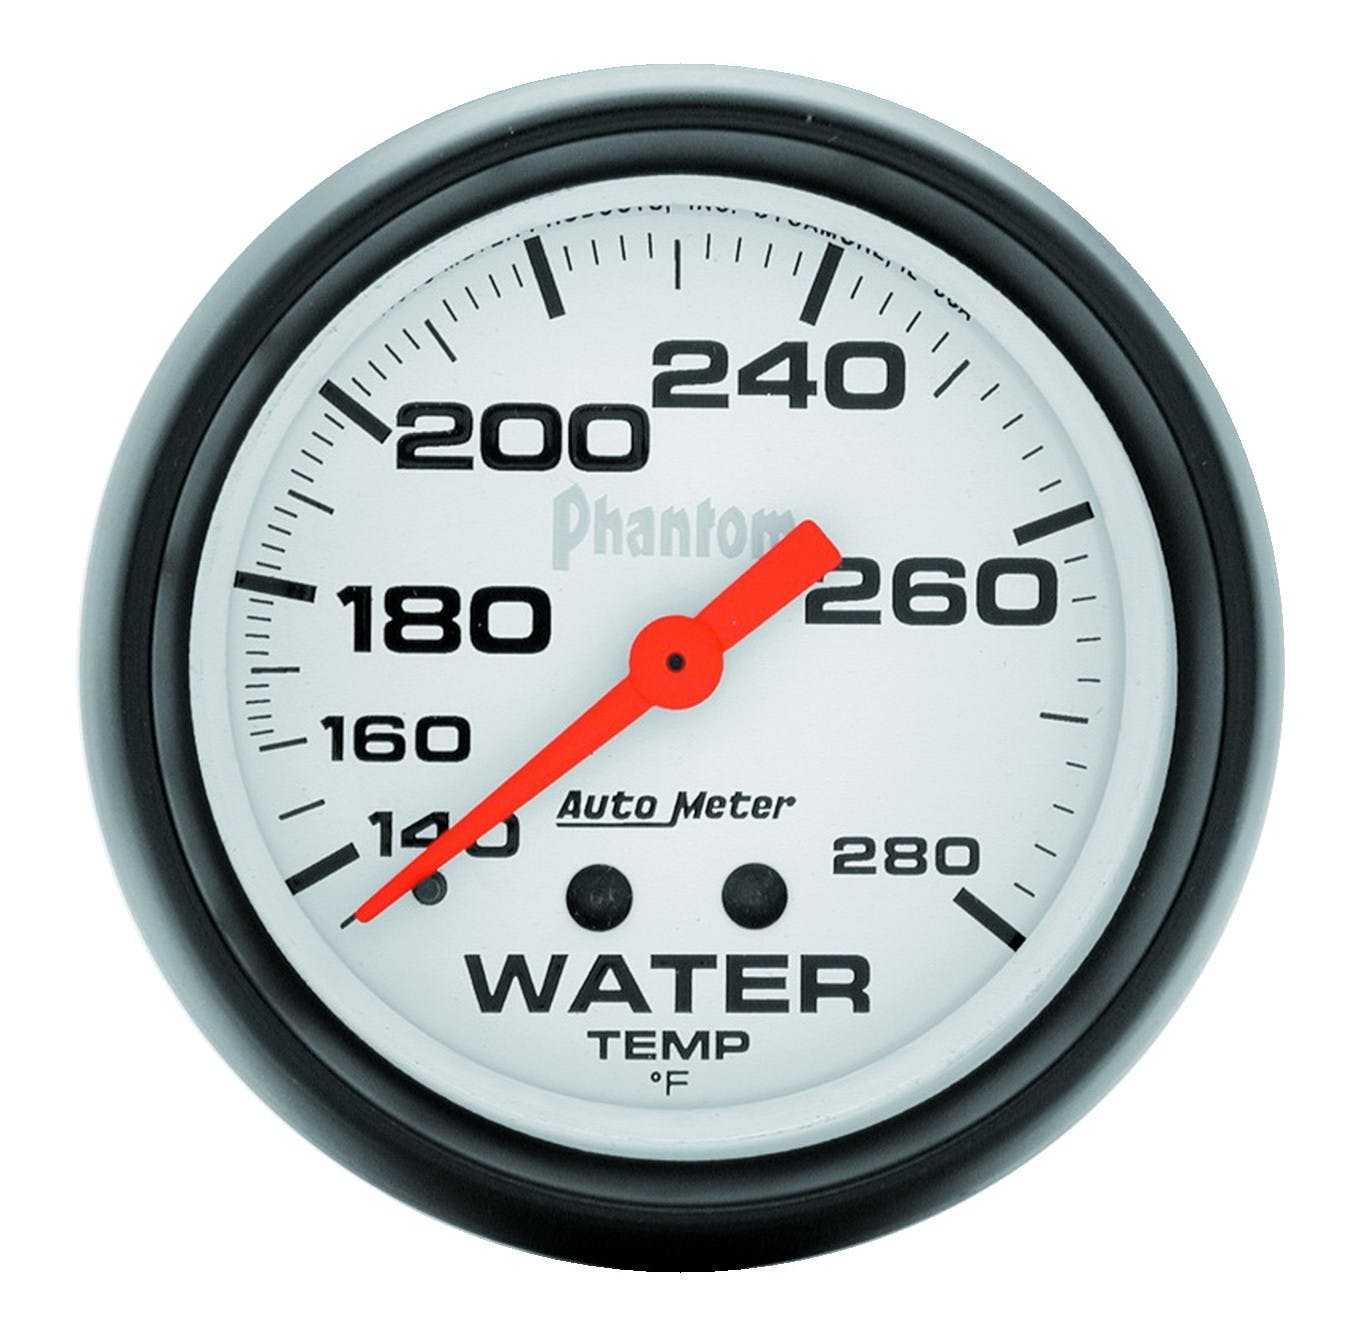 AutoMeter Products 5831 Water Temp 140-280 F